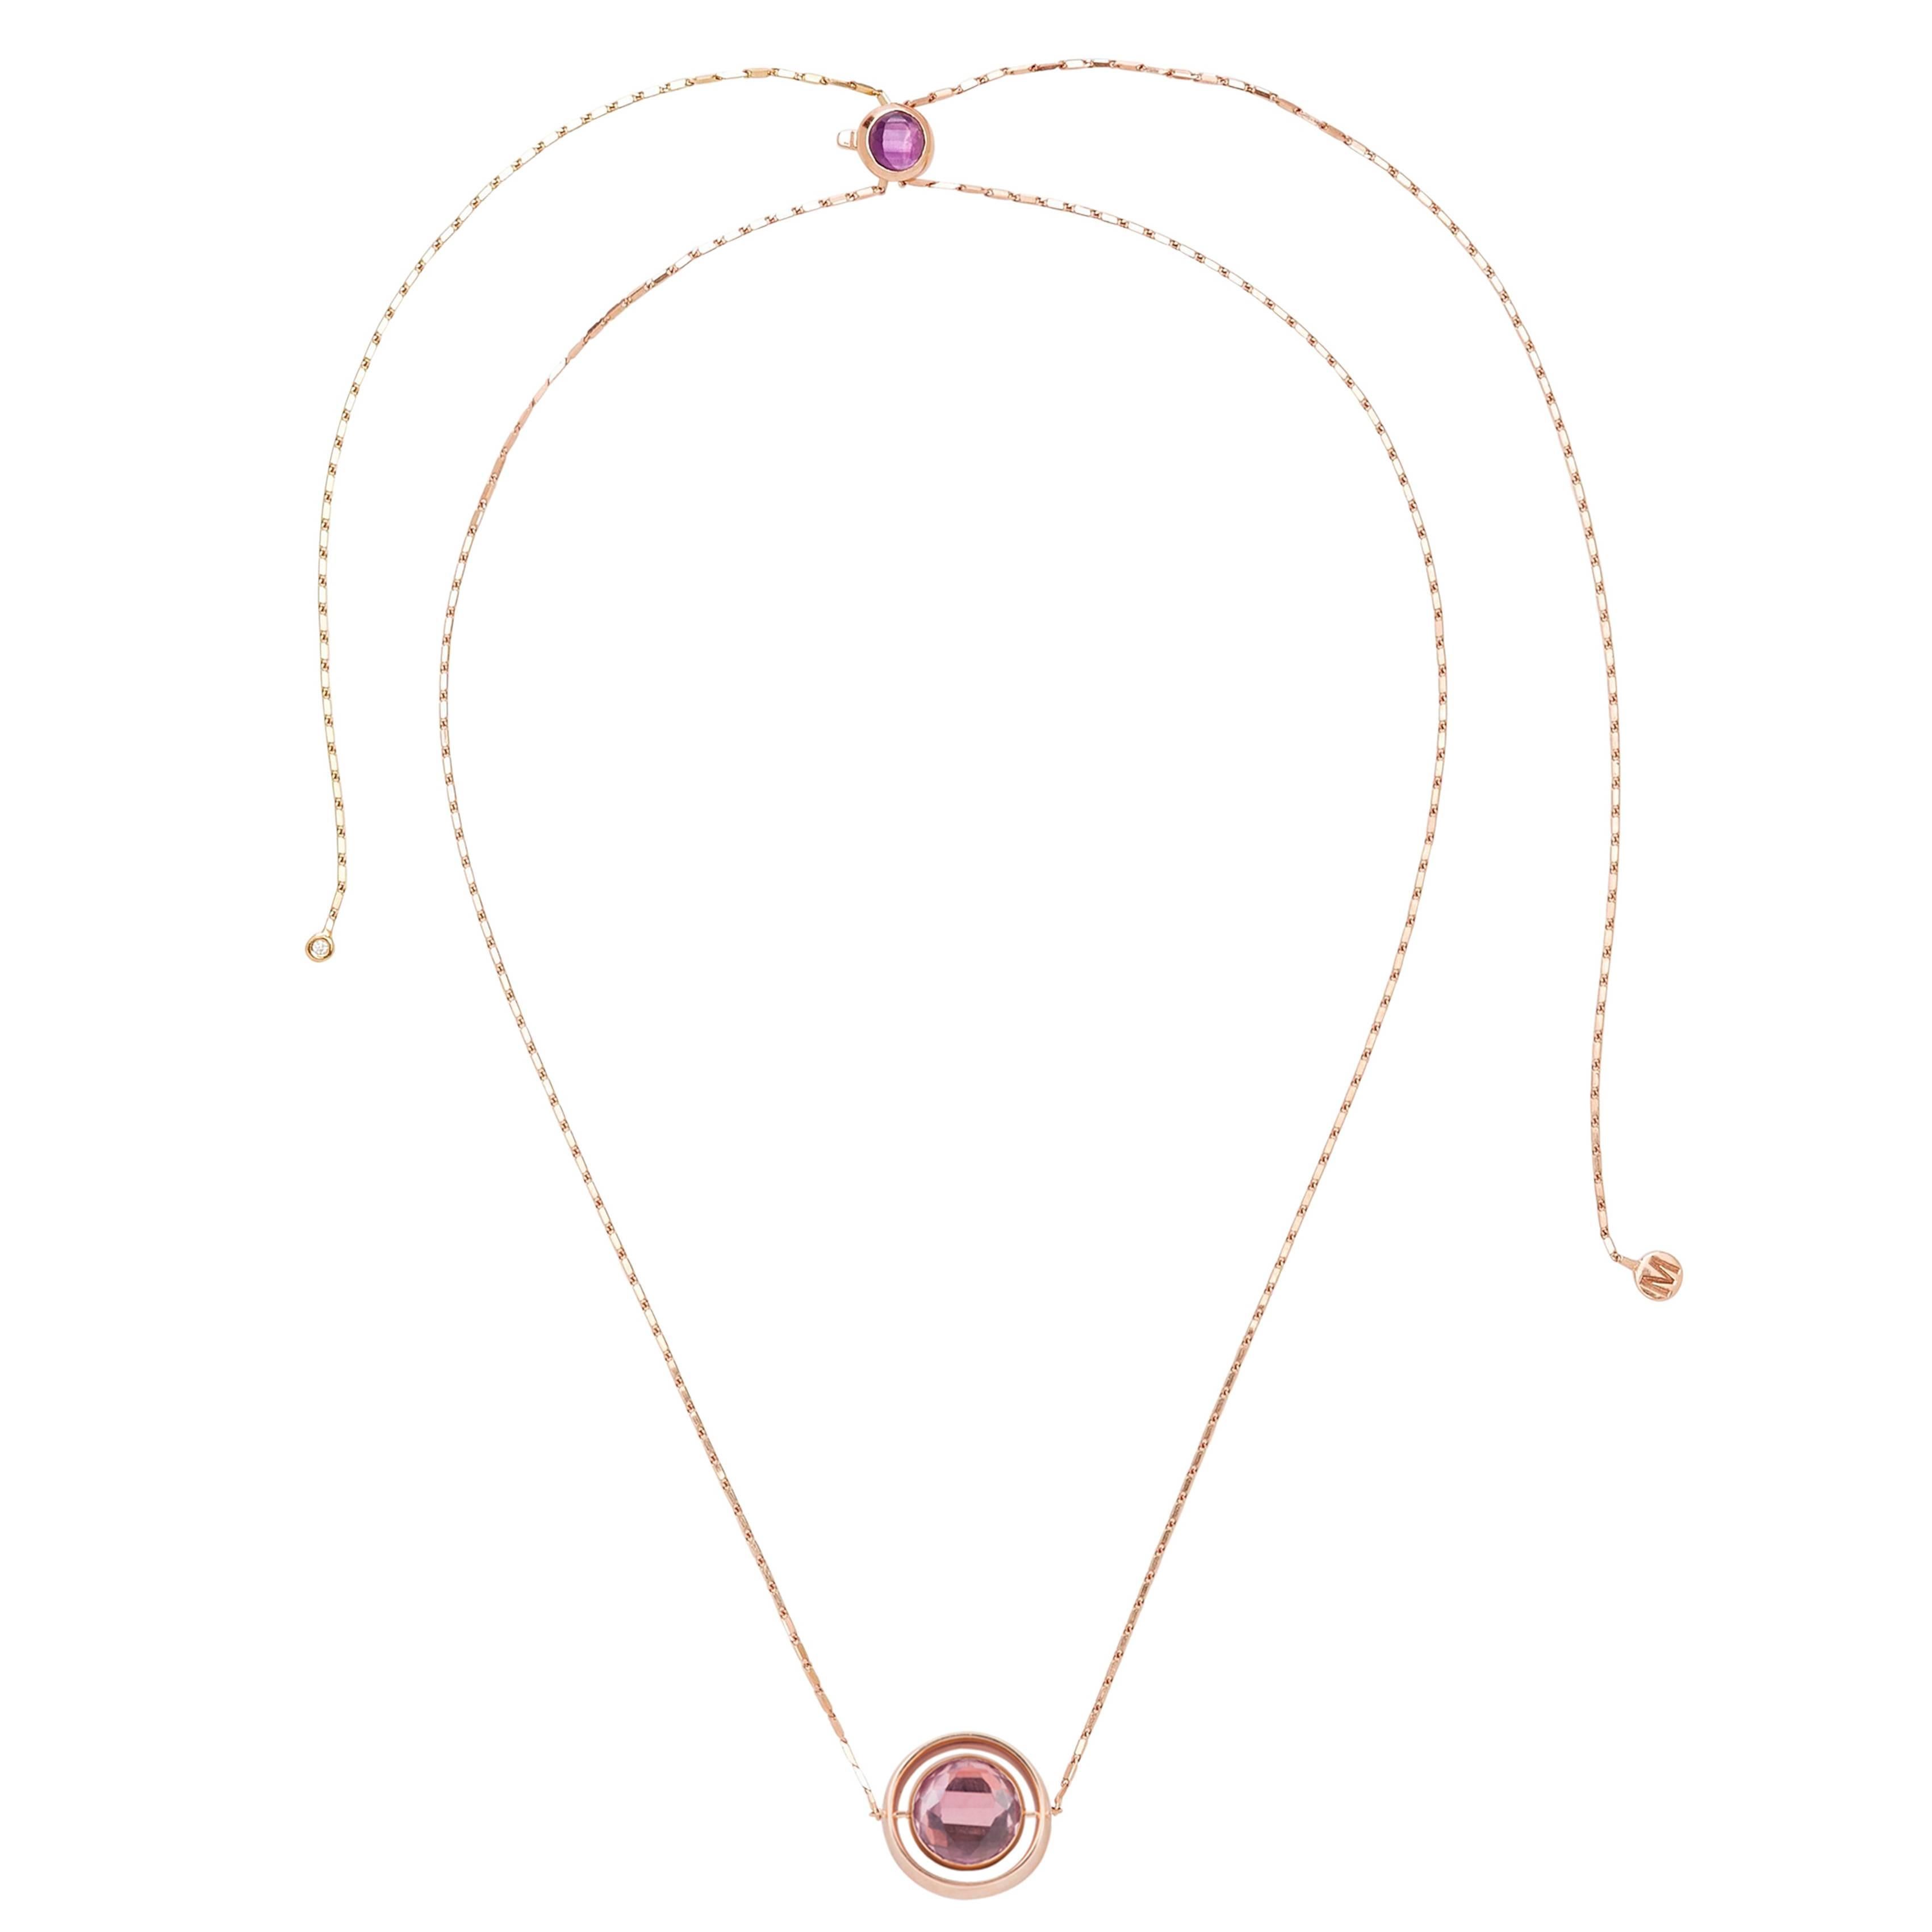 This Large Swiveling Necklace L is designed by the French Jewelry brand Marie Mas. 
The necklace is in 18 Carat Pink Gold, with Diamonds, Pink Amethyst and London Blue Topaz. The center stone is reversible : there is a Pink Amethyst and a London